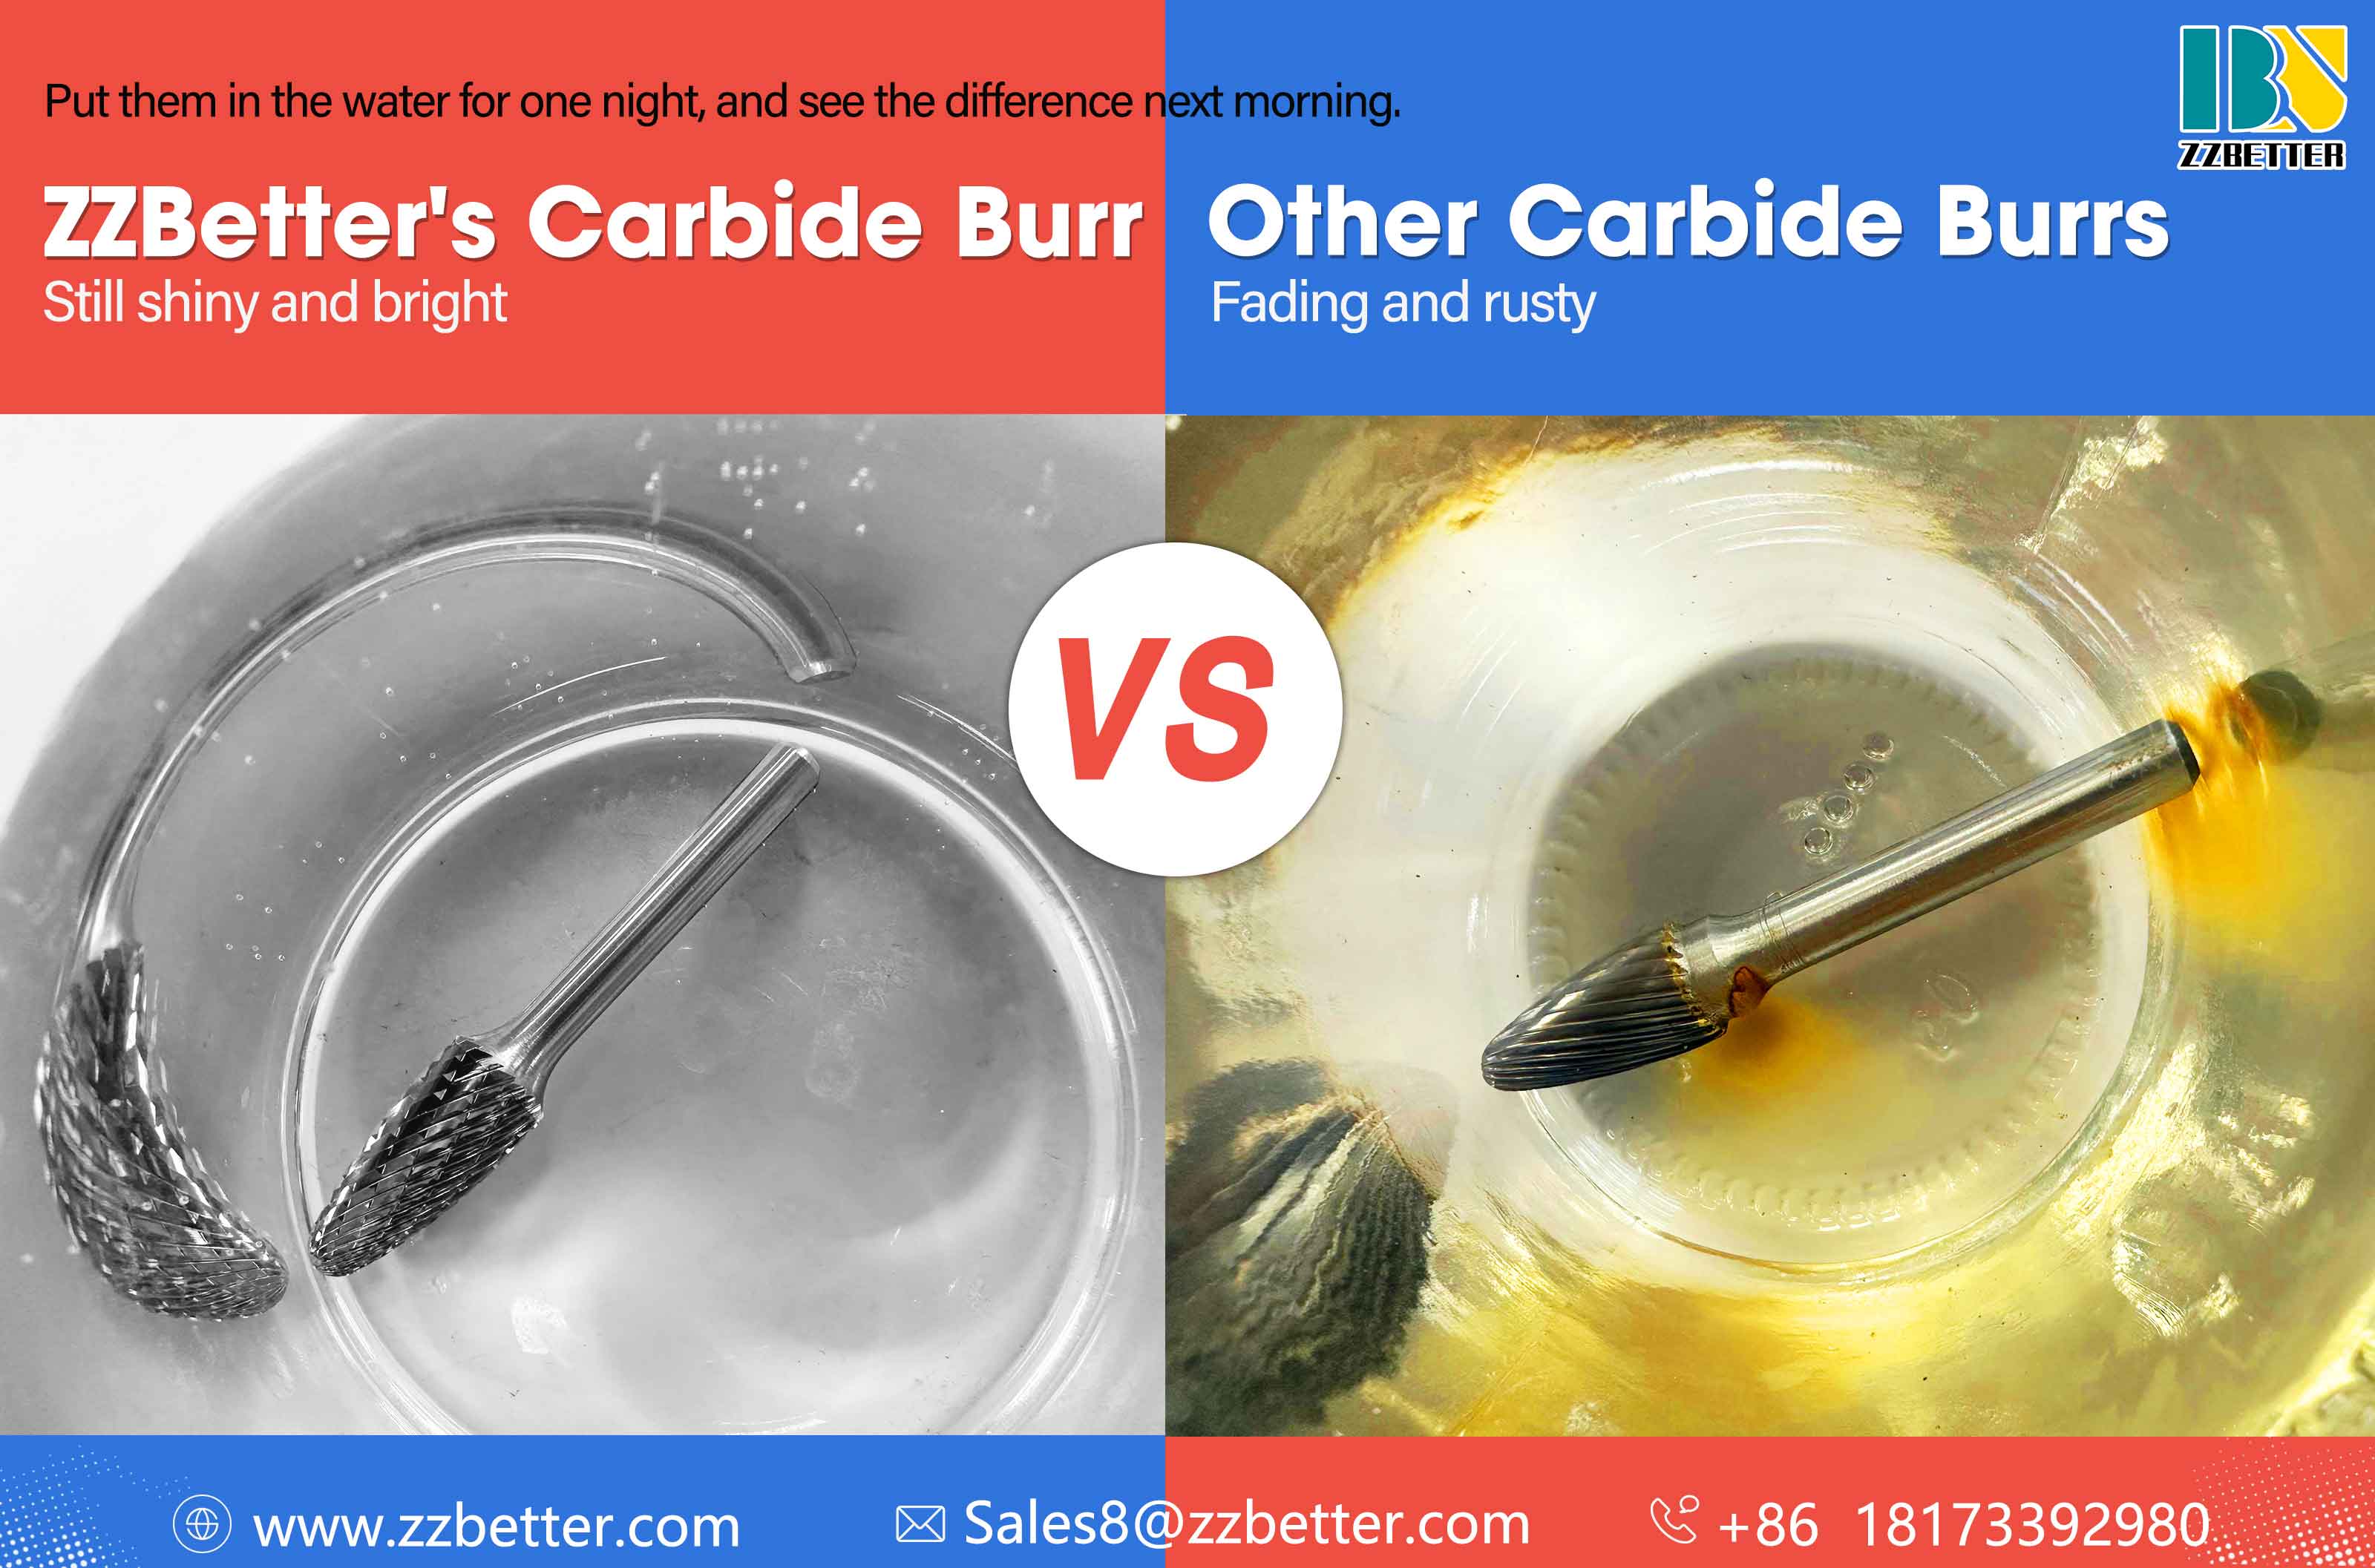 An Experiment of Two Carbide Burrs